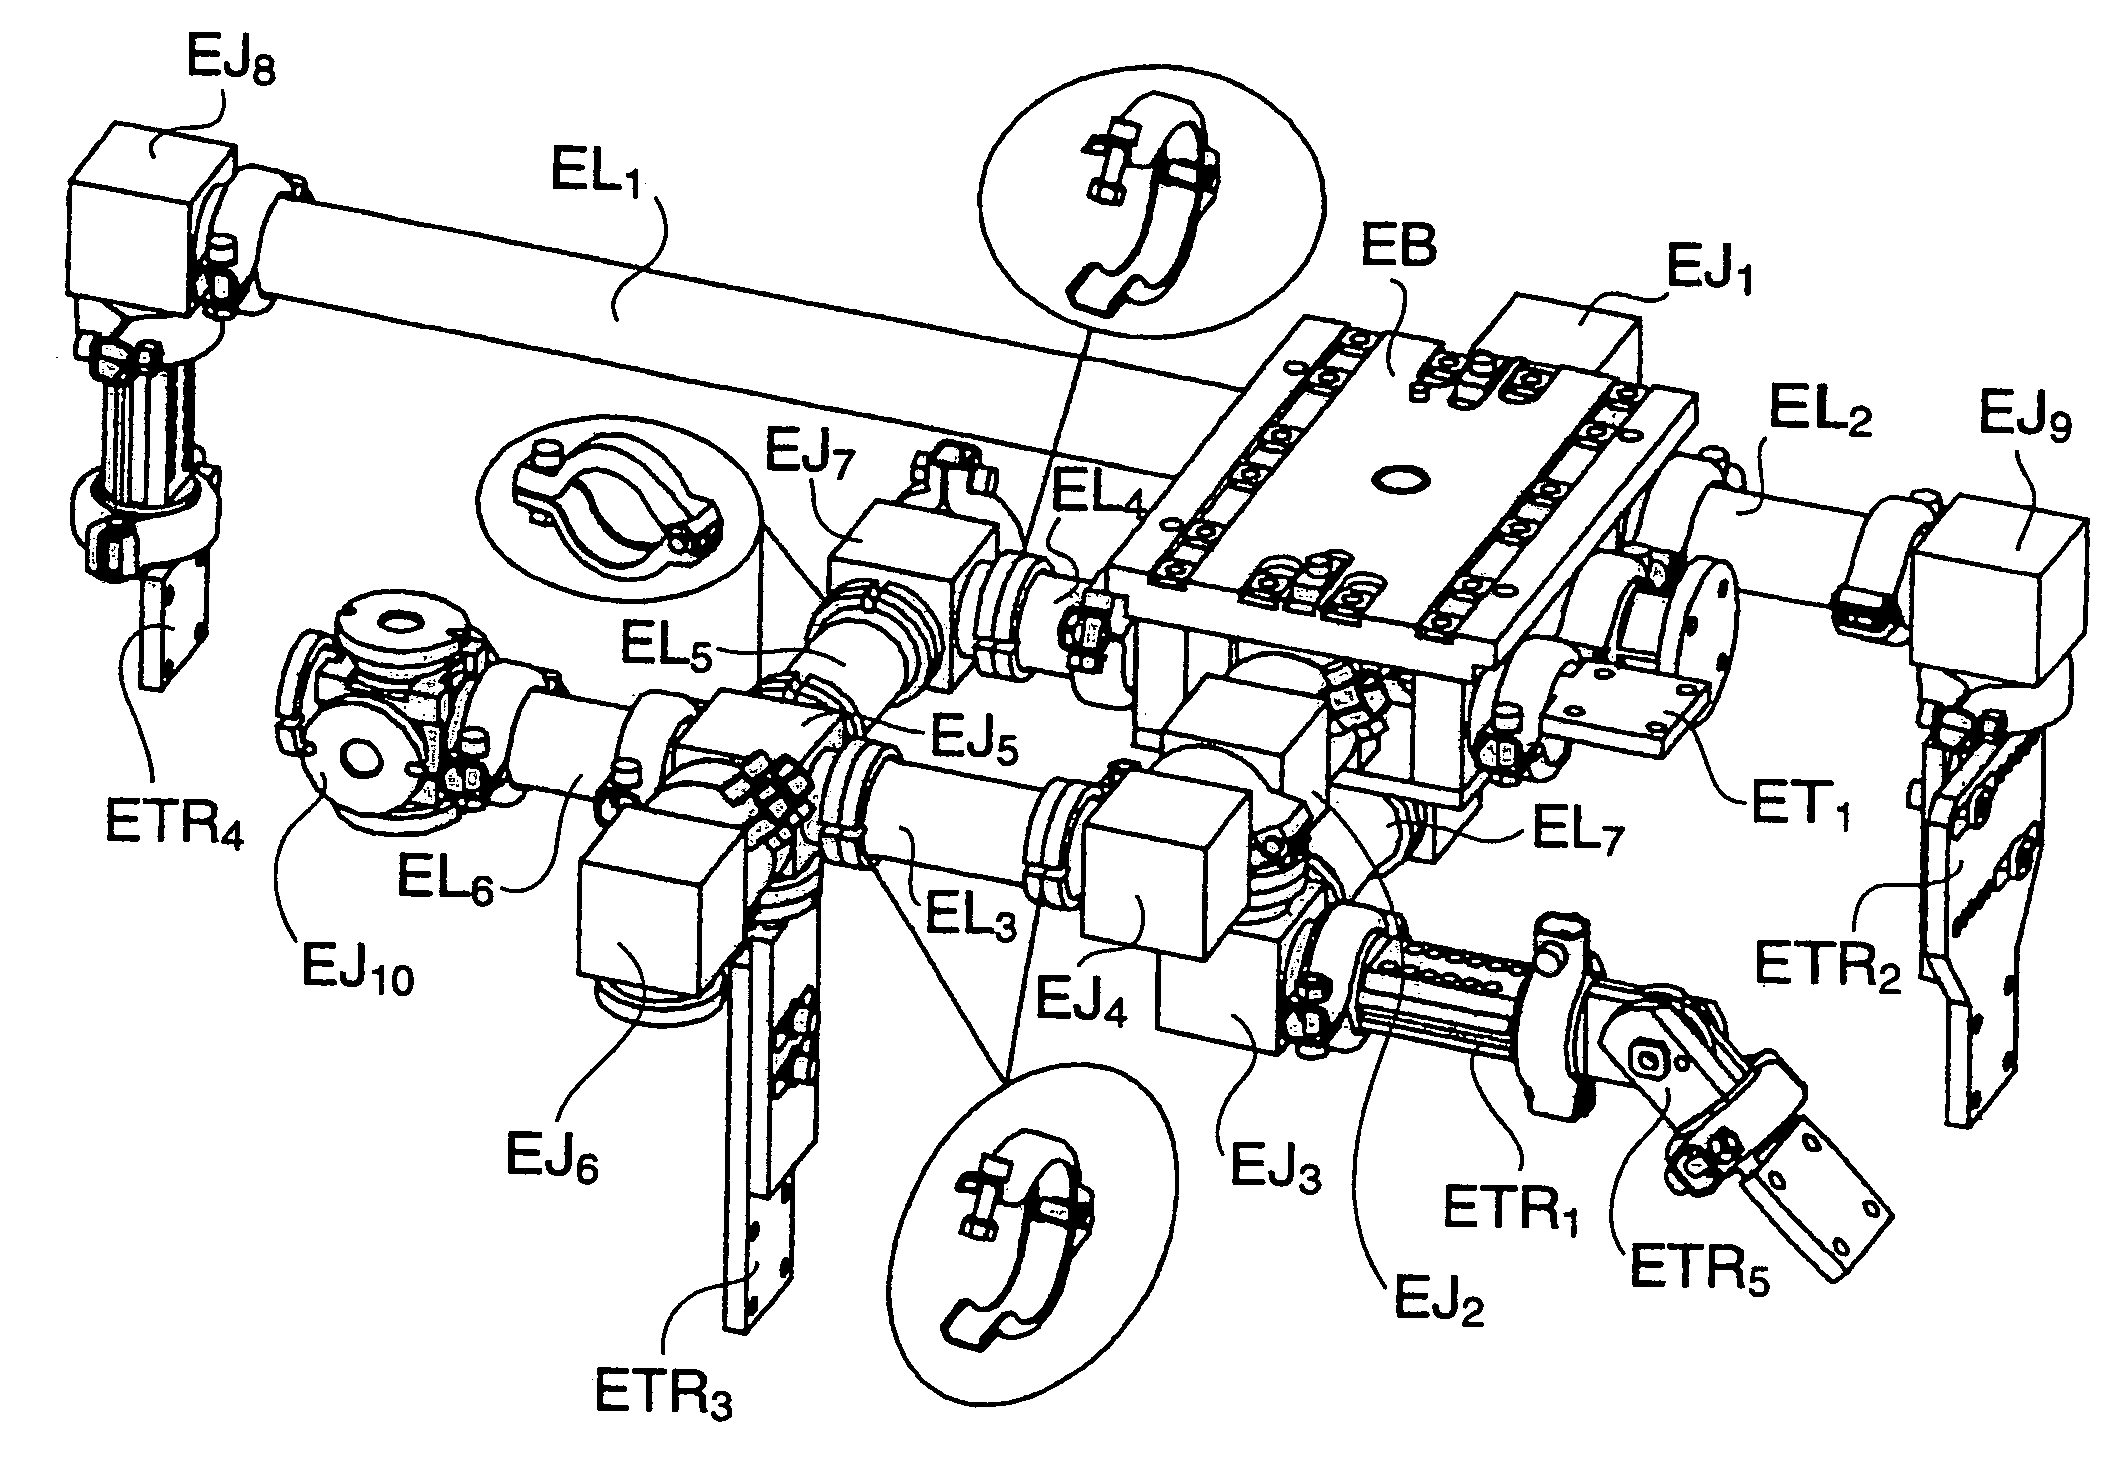 Device for the assembly of standard elements intended for the creation of precision mechanical structures